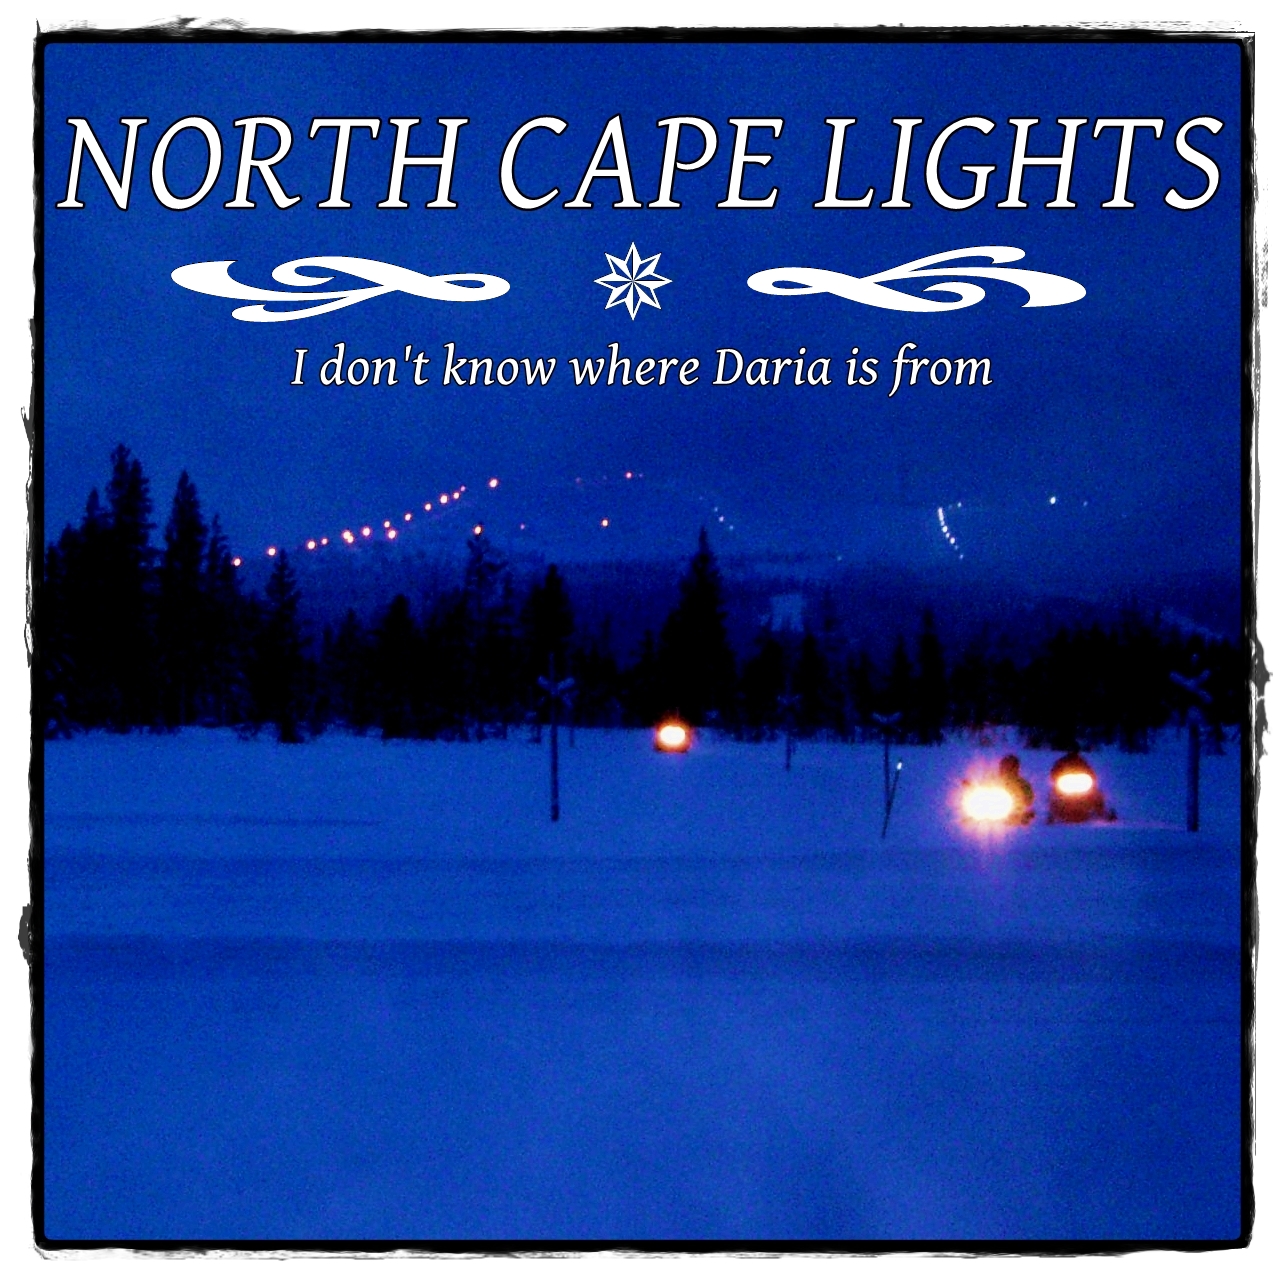 North Cape Lights I dont know where Daria is from